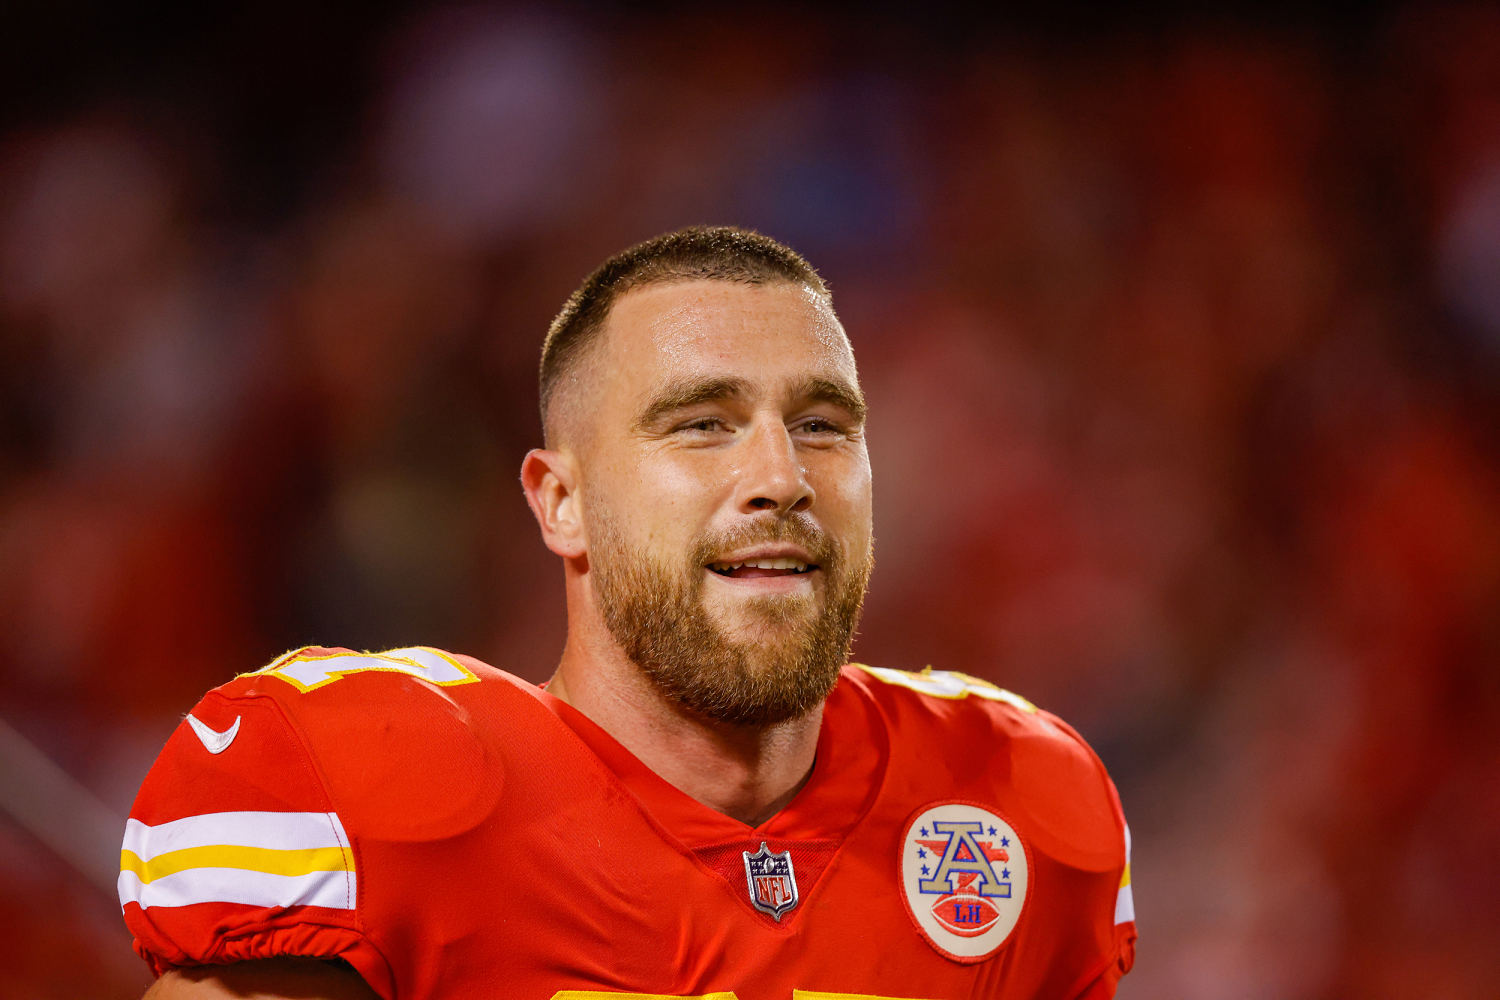 Chiefs star Travis Kelce agrees to 2-year extension to remain in Kansas City